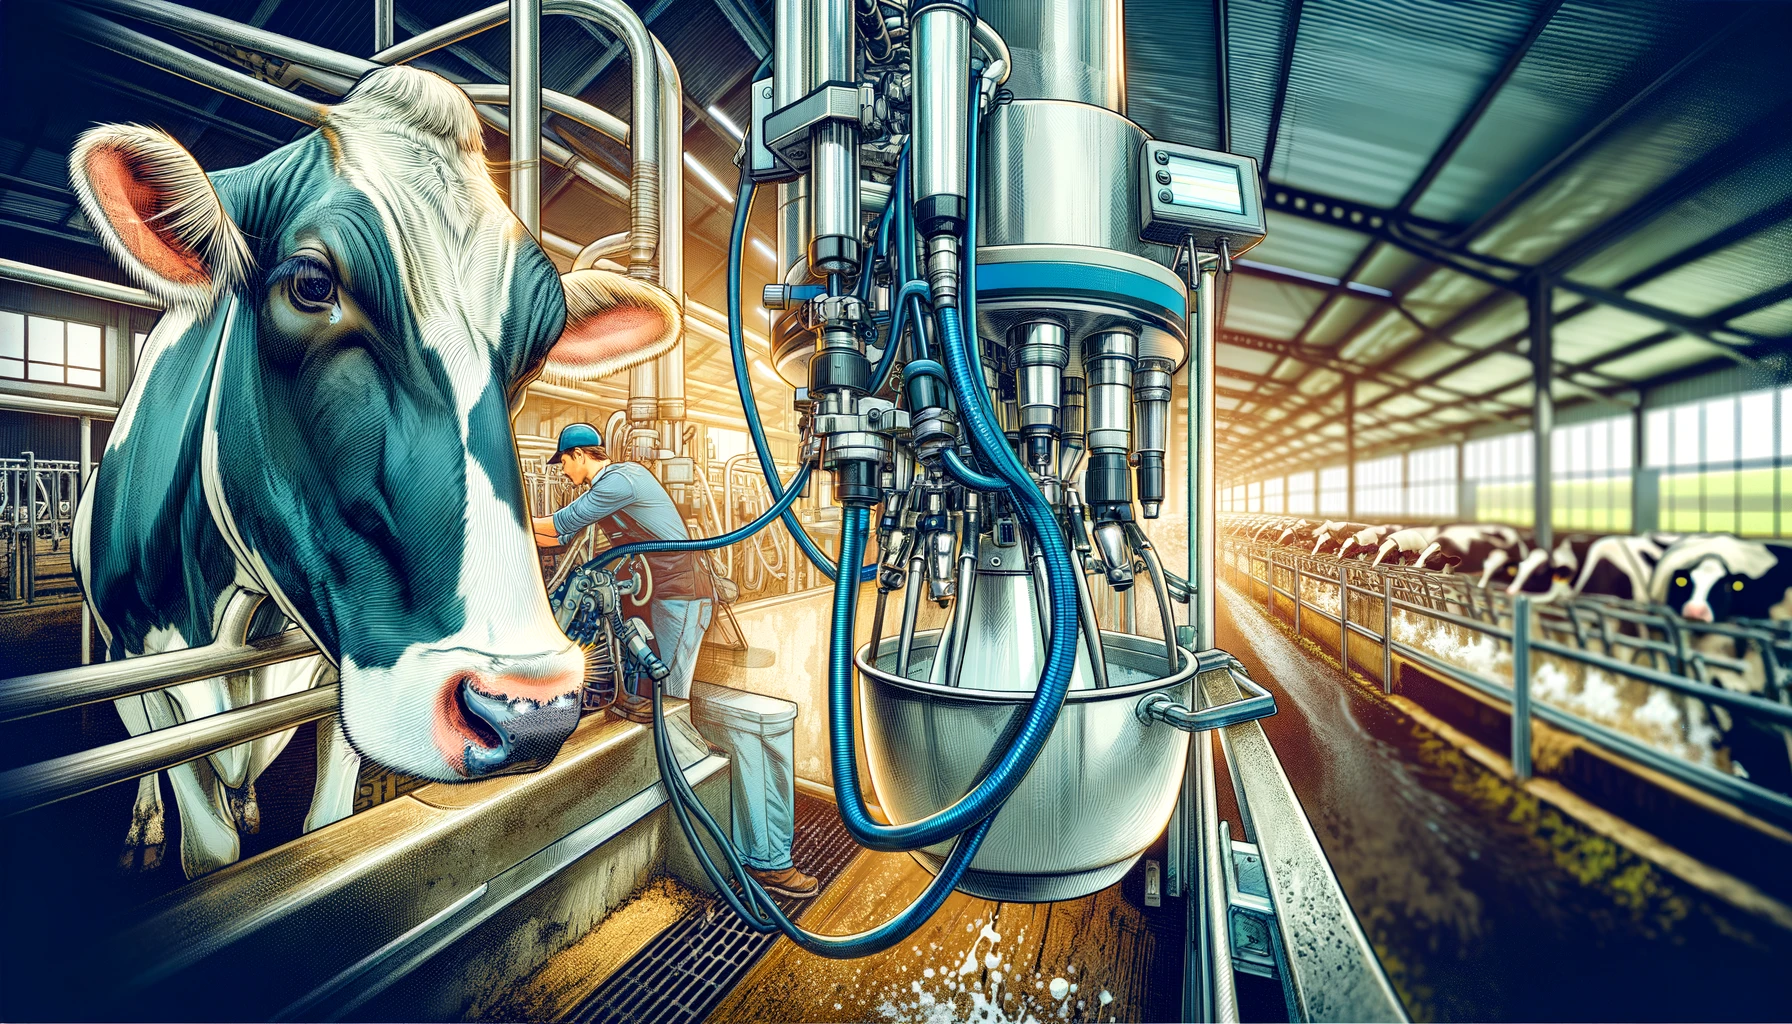 Dairy Farm Equipment - A vivid and detailed wide closeup illustration of farm equipment on a dairy farm, focusing on a milking machine in operation. The scene shows a dairy